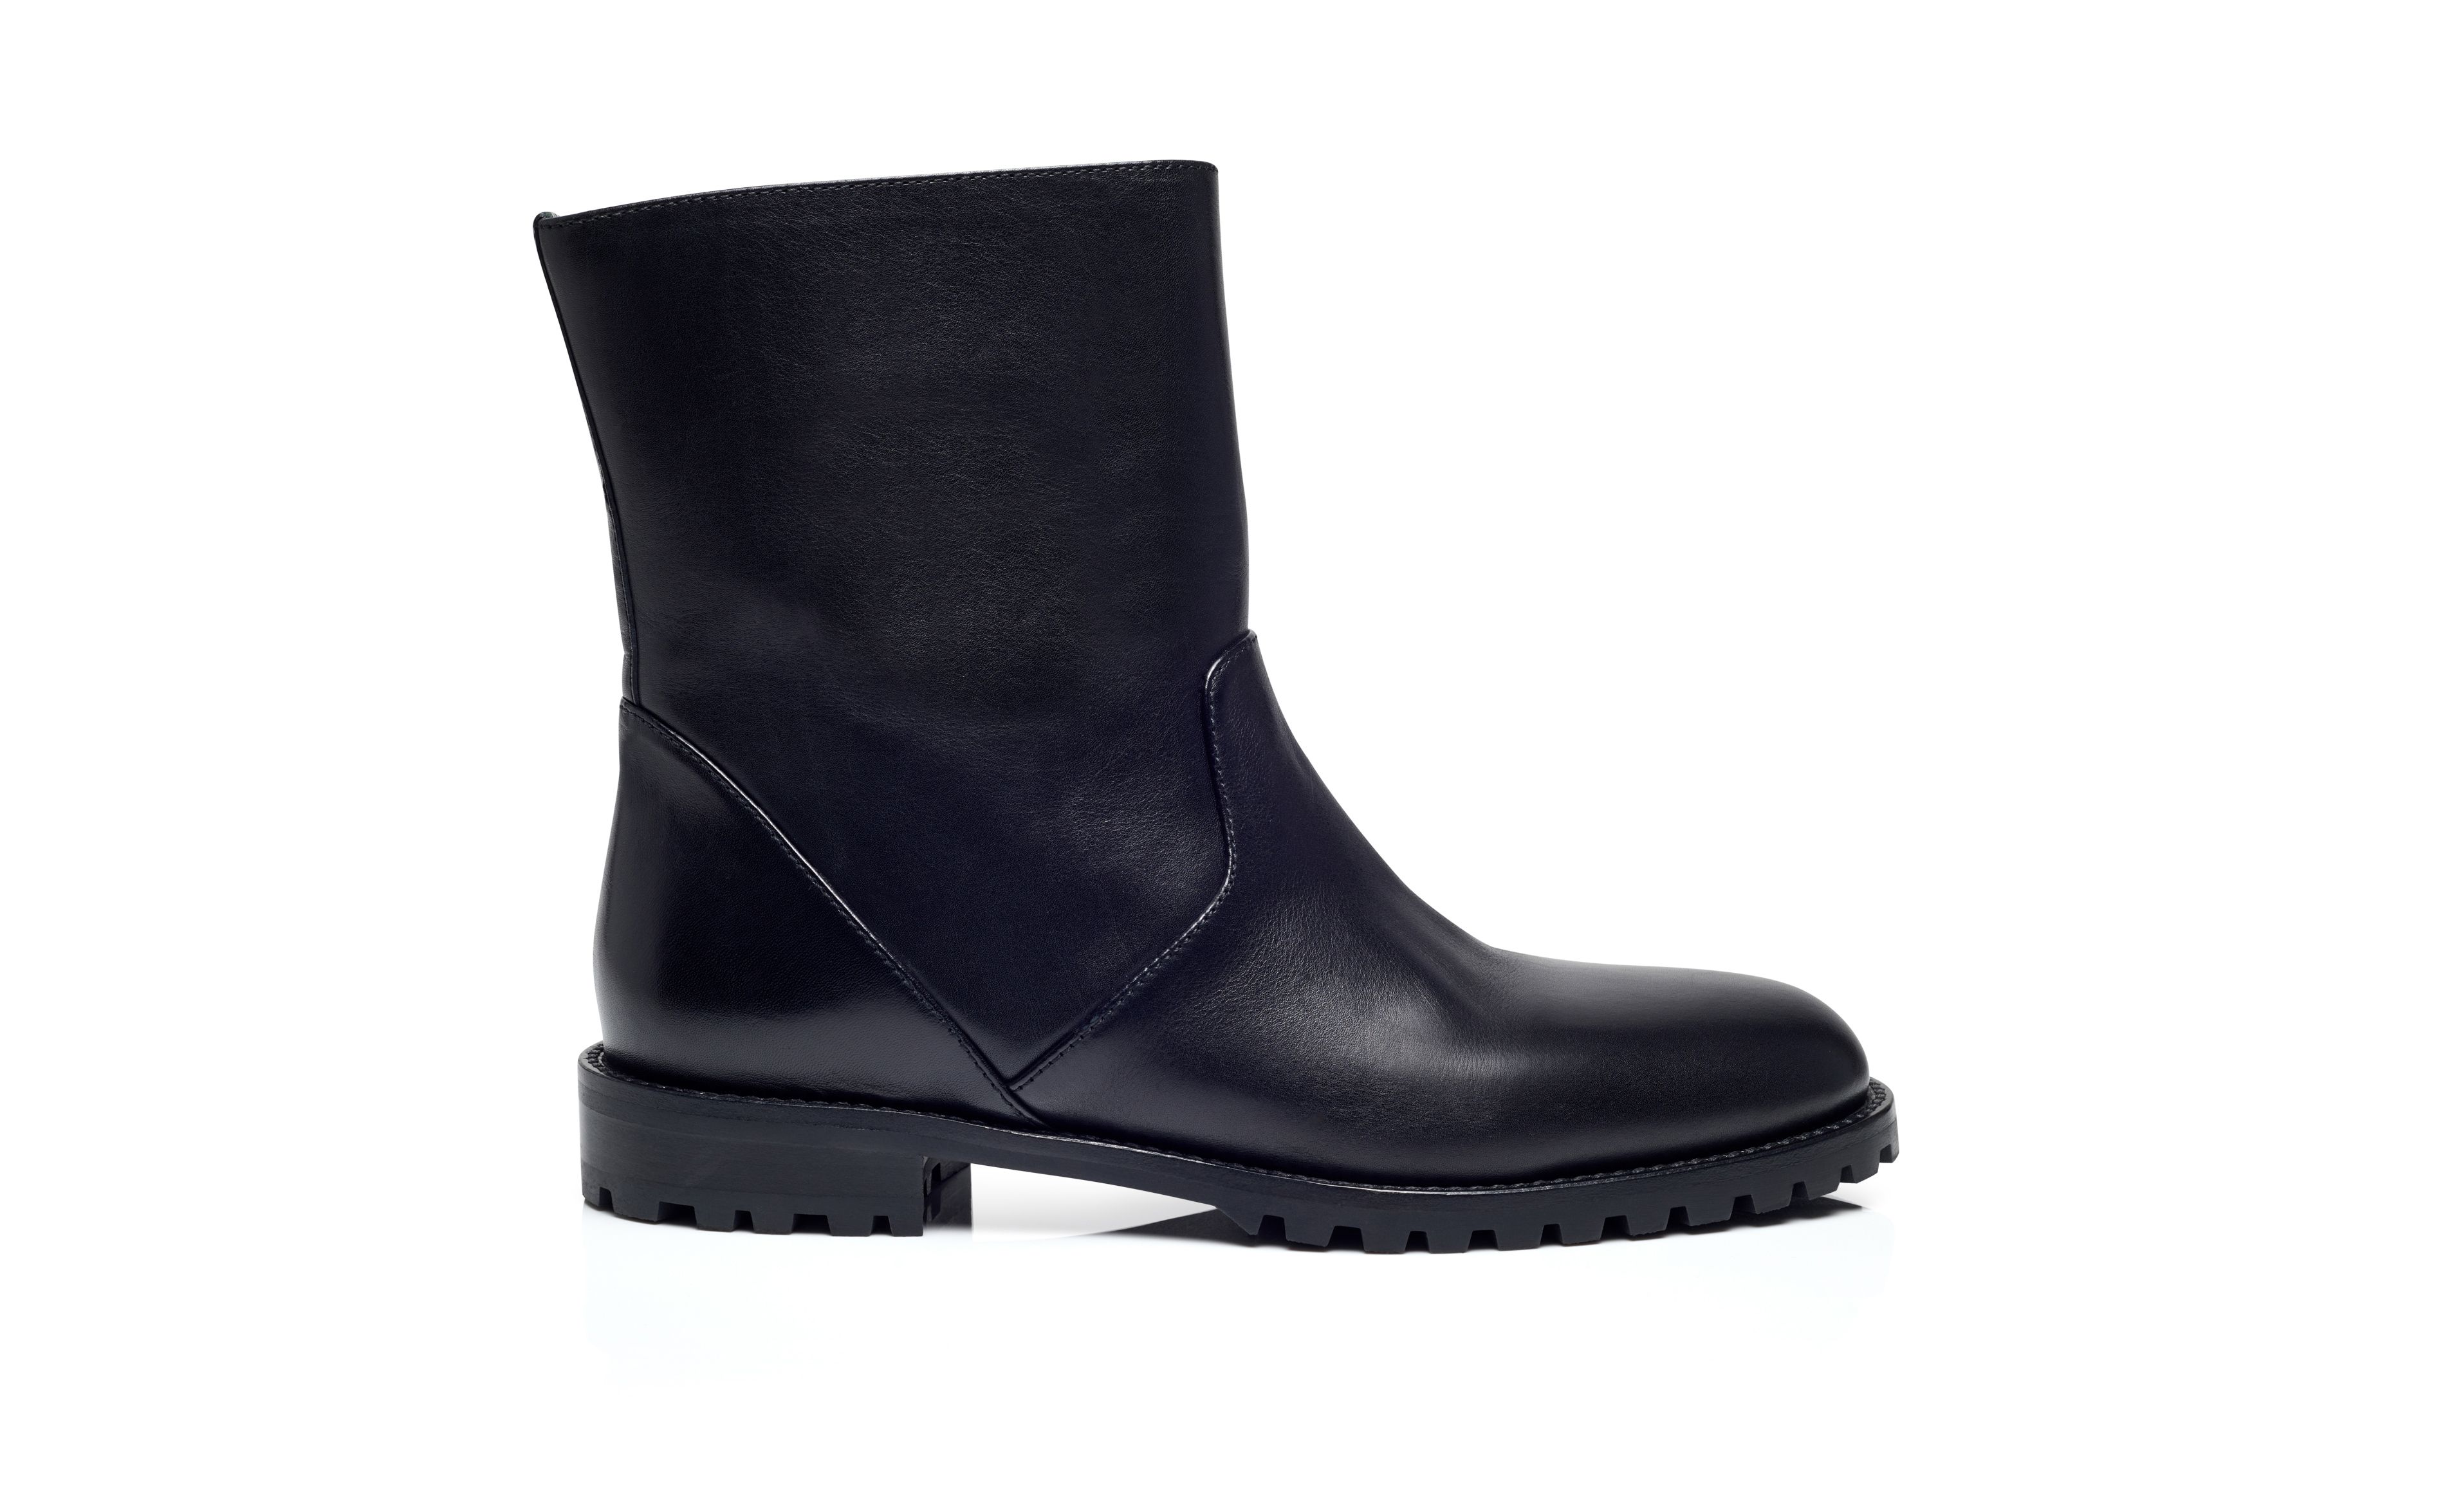 Designer Black Calf Leather Ankle Boots - Image Side View